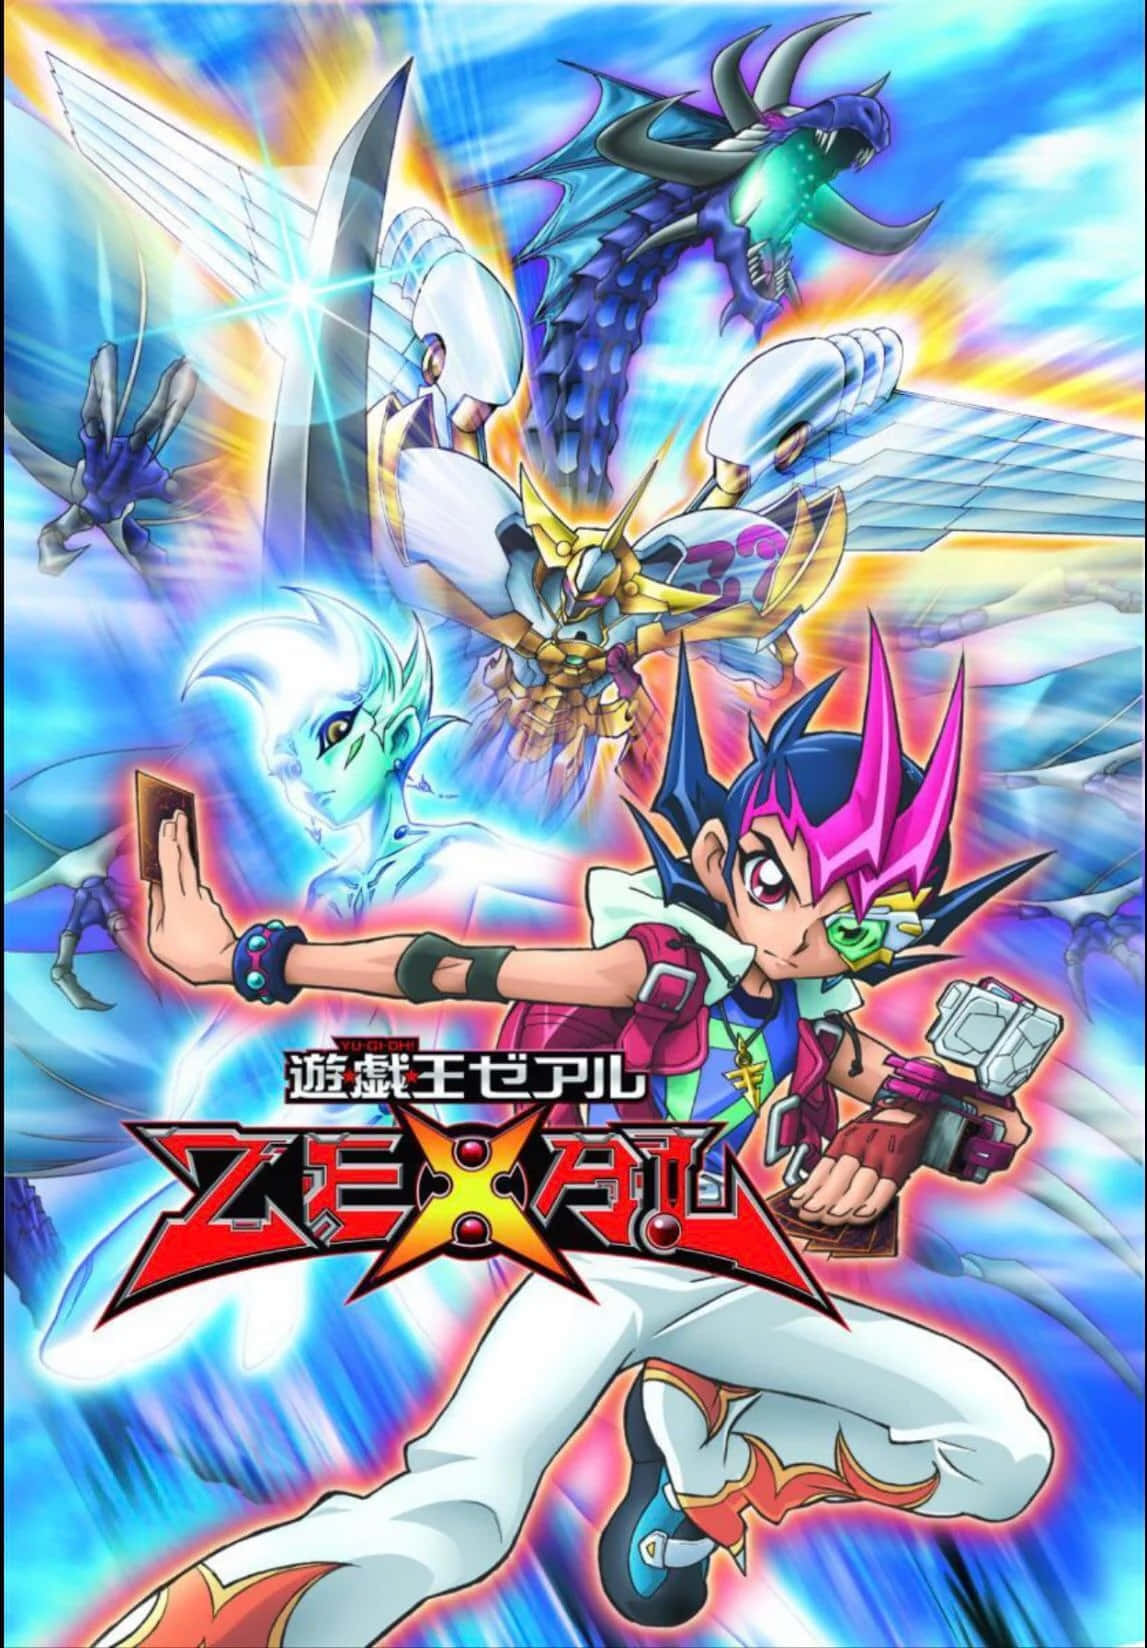 Yu-Gi-Oh! Astral character in action on a high-quality wallpaper Wallpaper